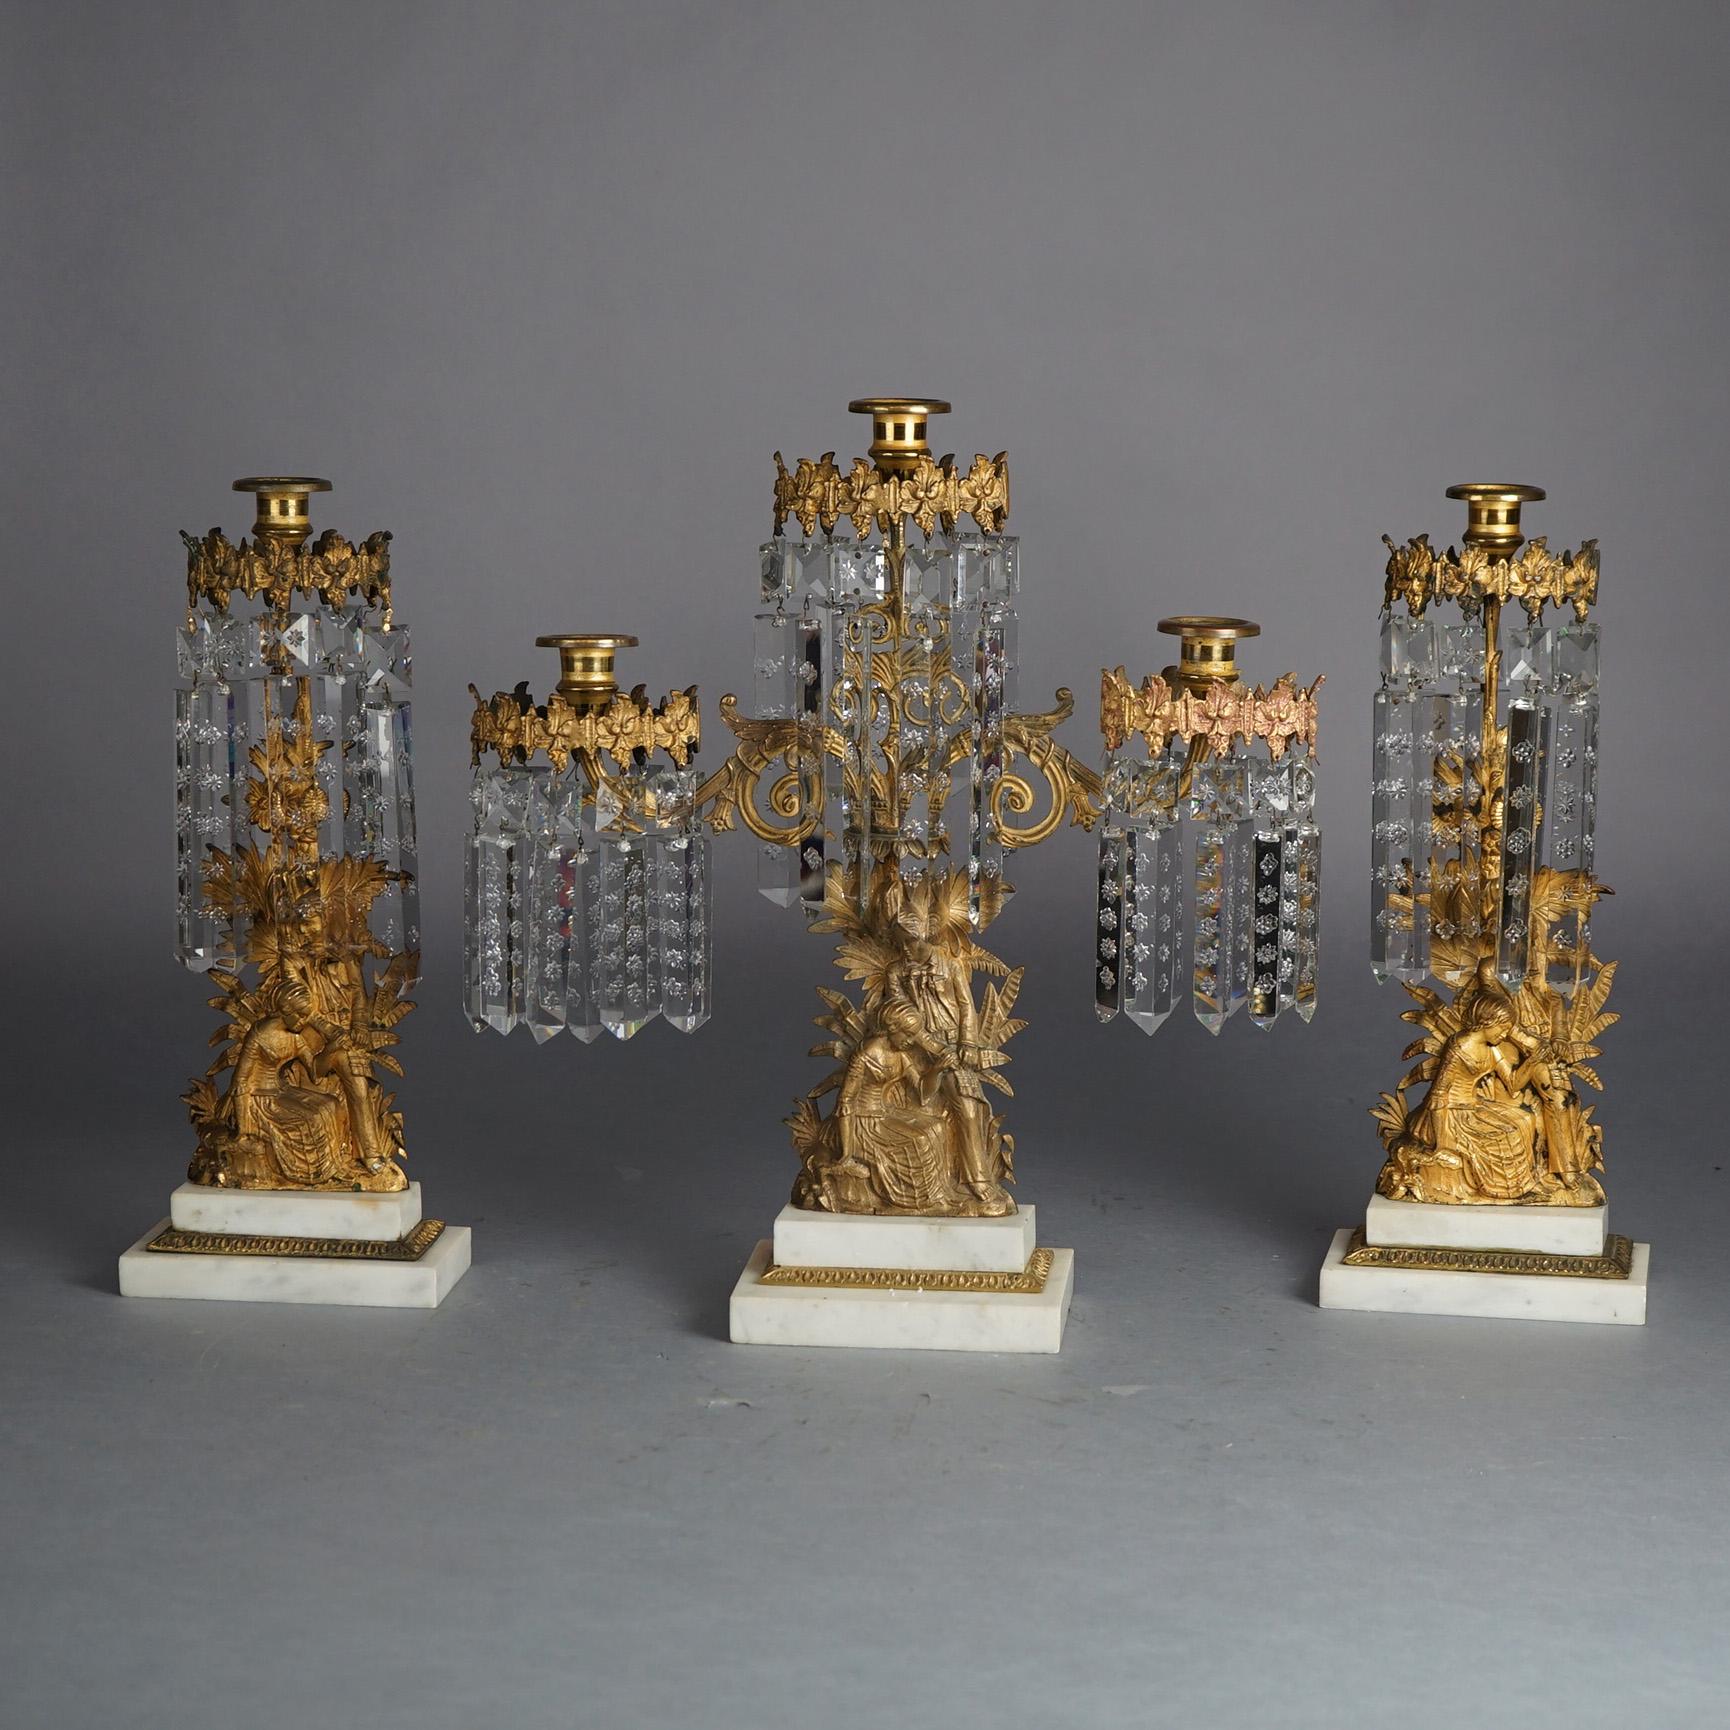 Antique Gilt Bronze American Girandole Candelabras with Marble & Crystals C1880 For Sale 7